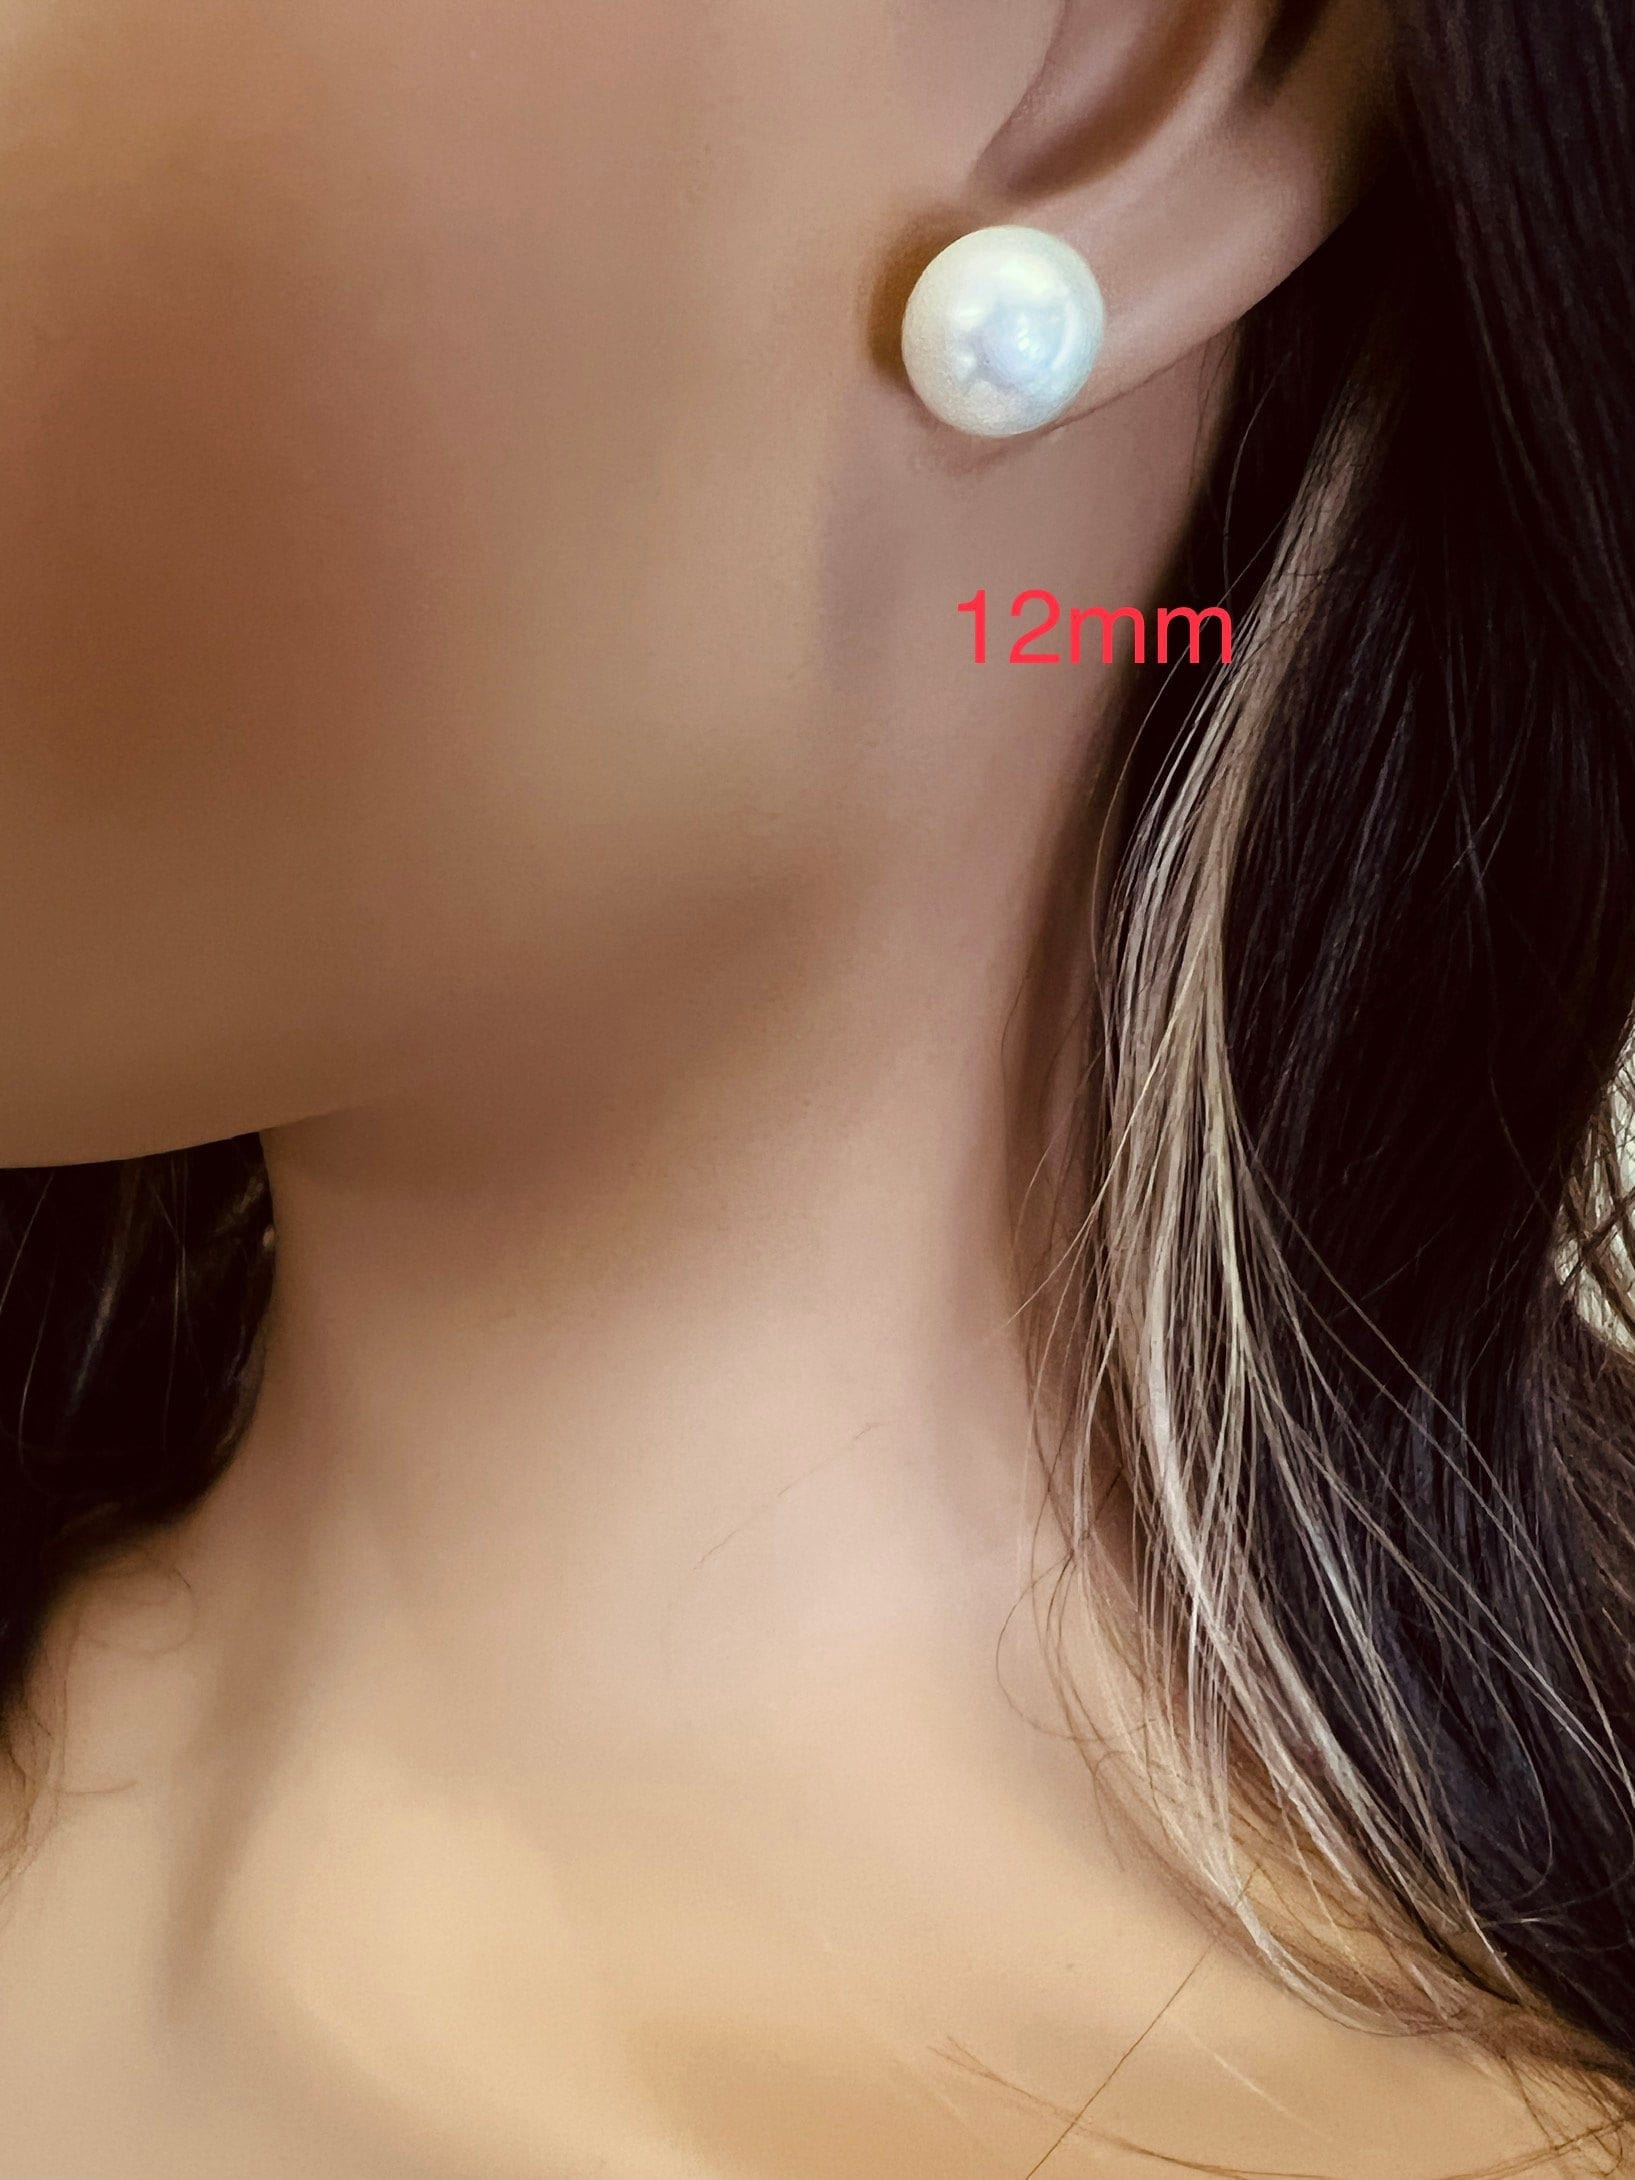 Half drilled White South Sea Shell Pearl earring 10,12,14mm Large High Luster pearl in silver filled post earrings, elegant Bridal gift